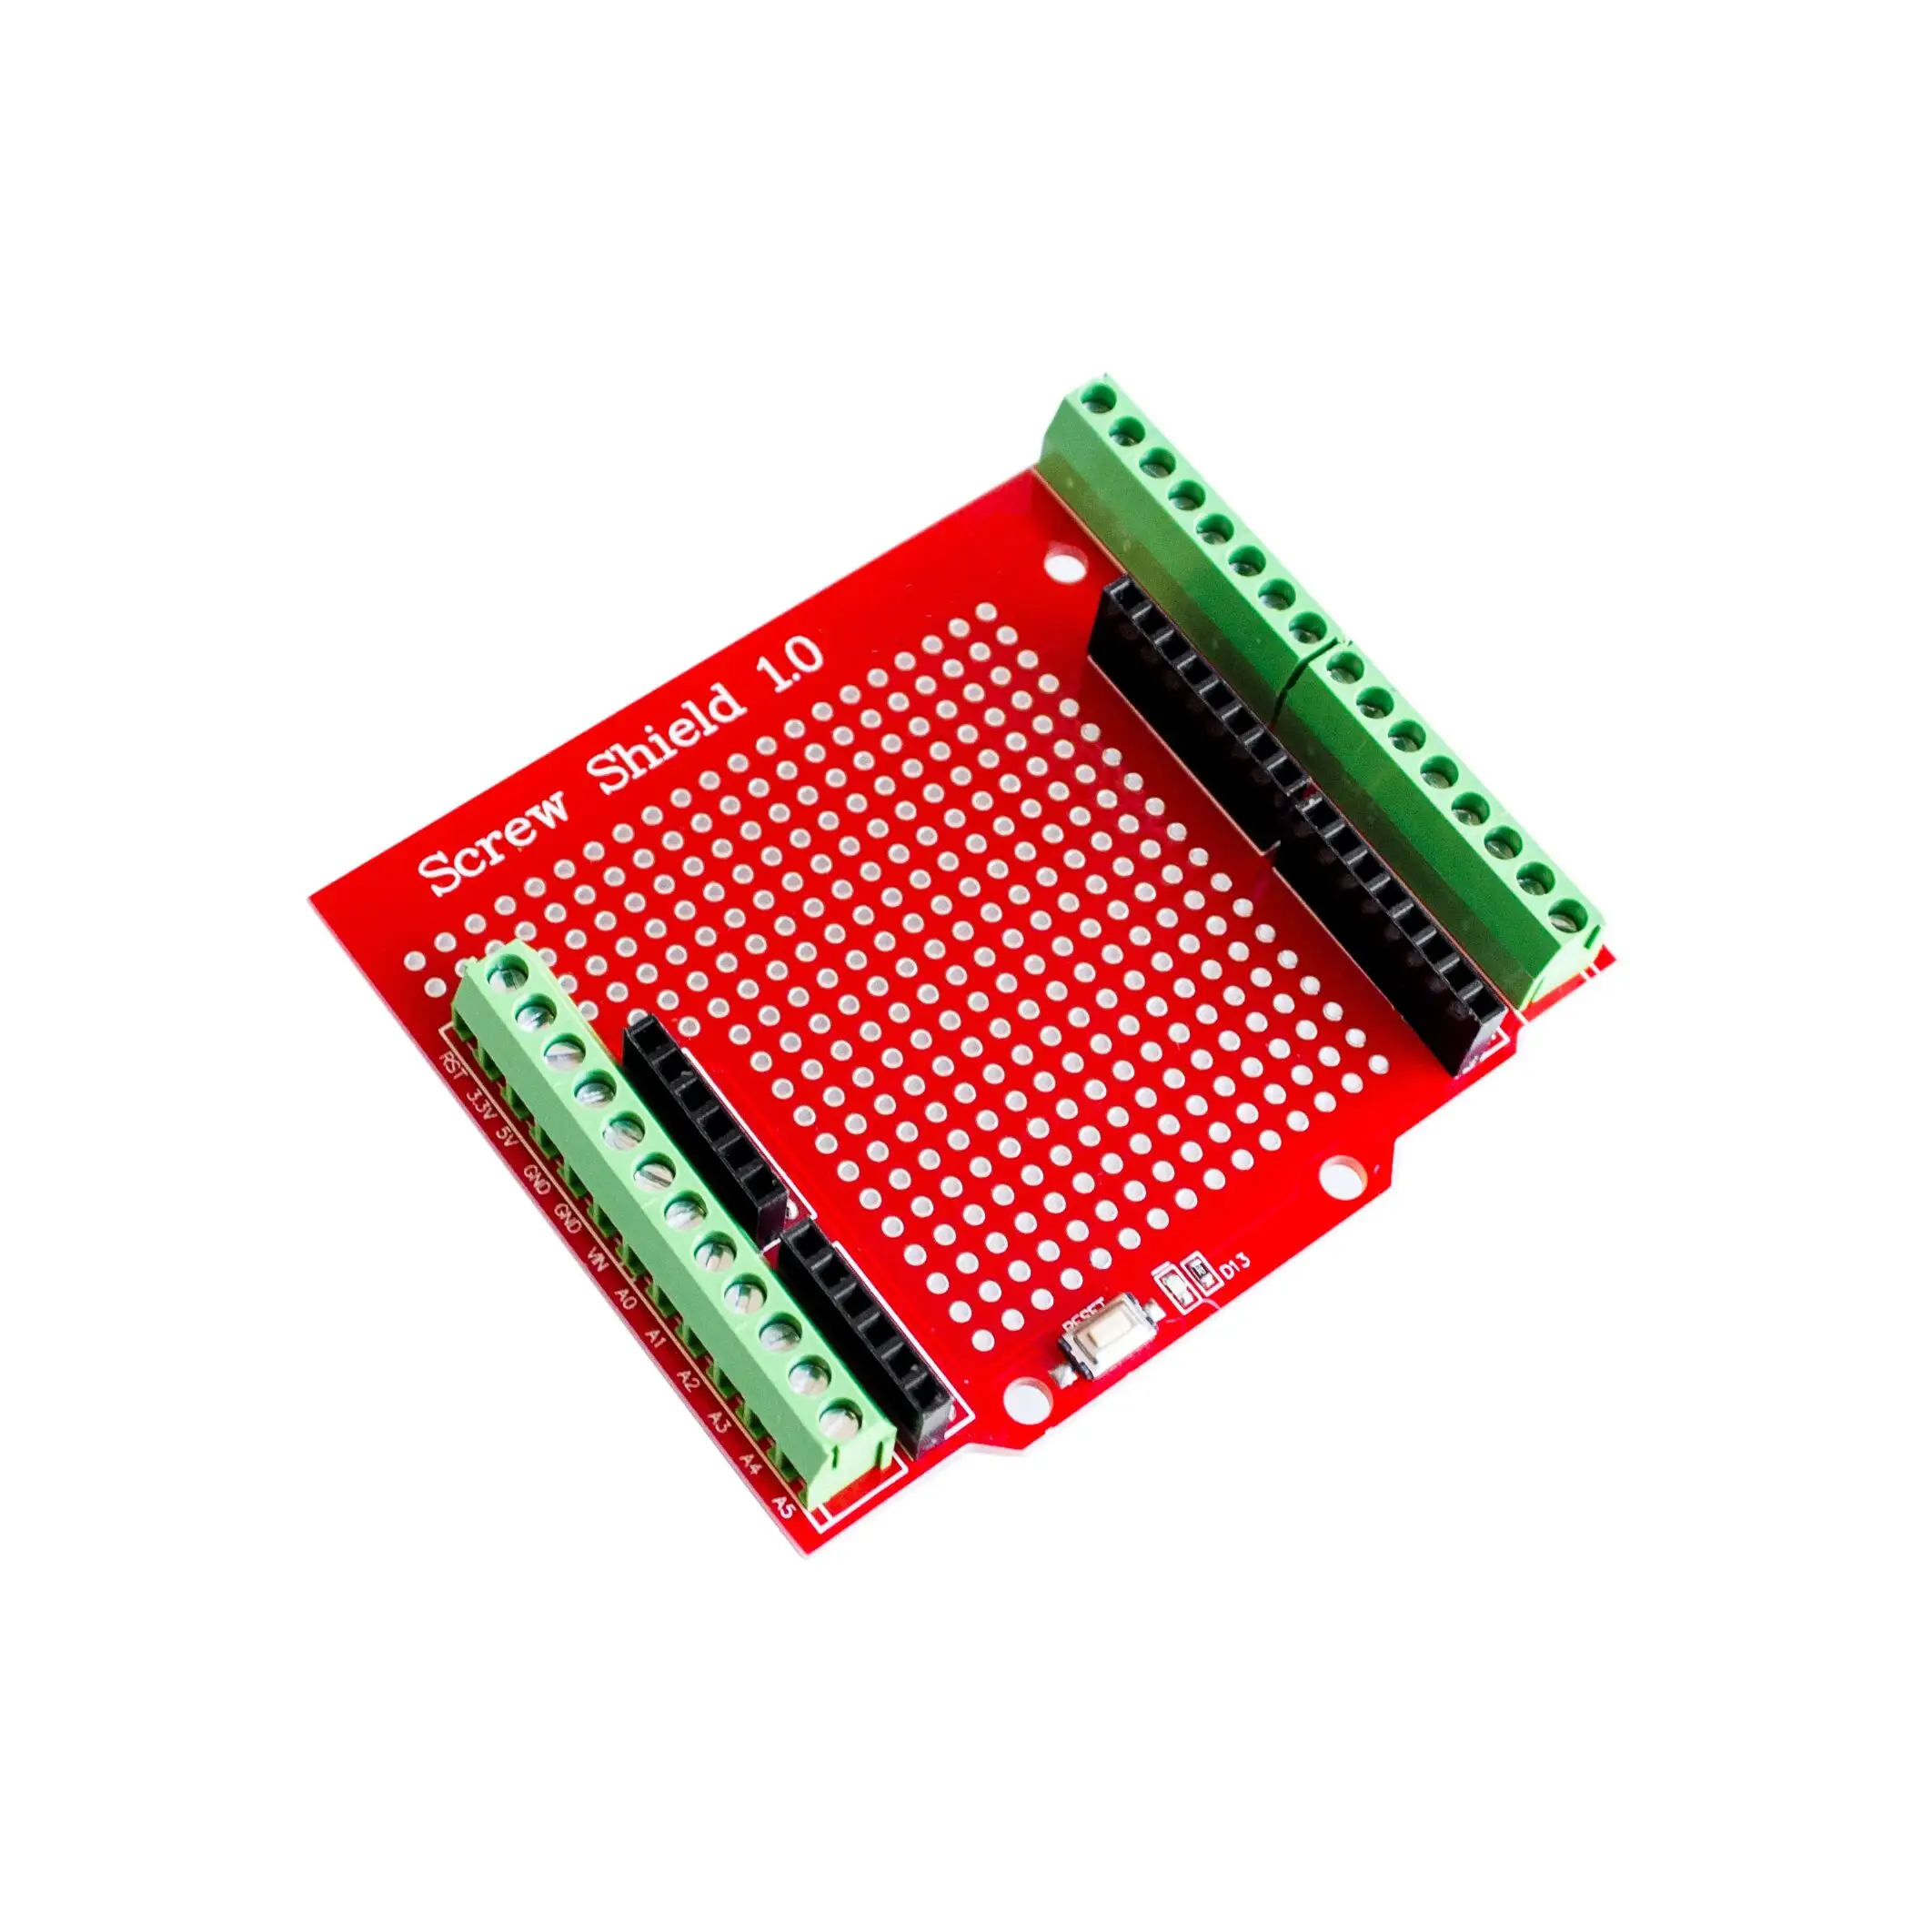 Proto Screw Shield for Open Source Reset Button D13 LED NEW For Breadboard 3.81 Terminal Double-sided PCB SMT Solder DIY